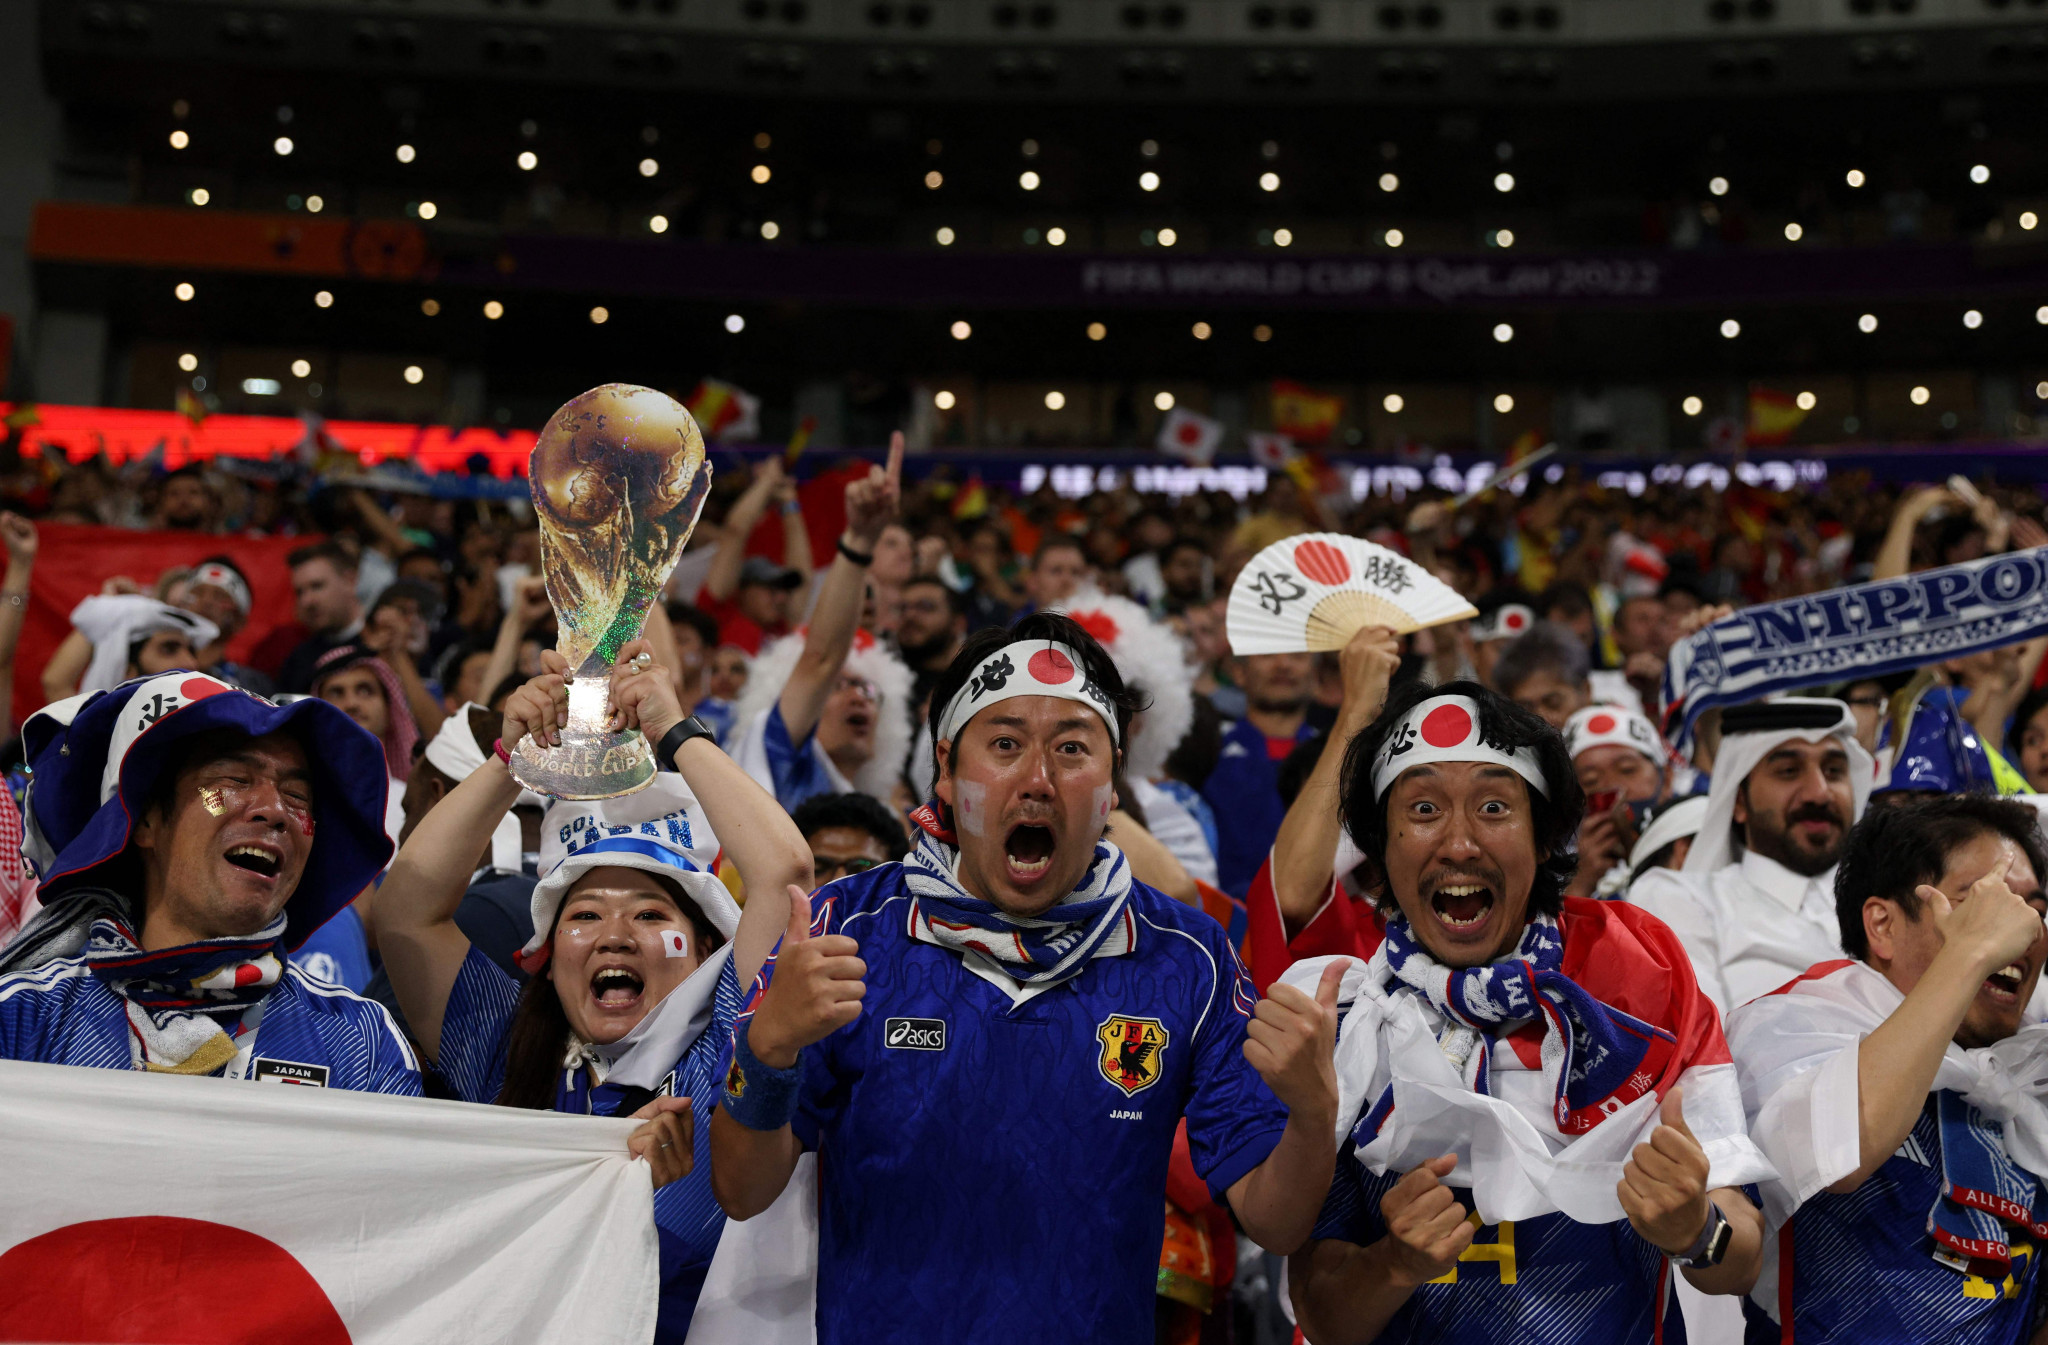 Japan's fans celebrating their lead against Spain ©Getty Images